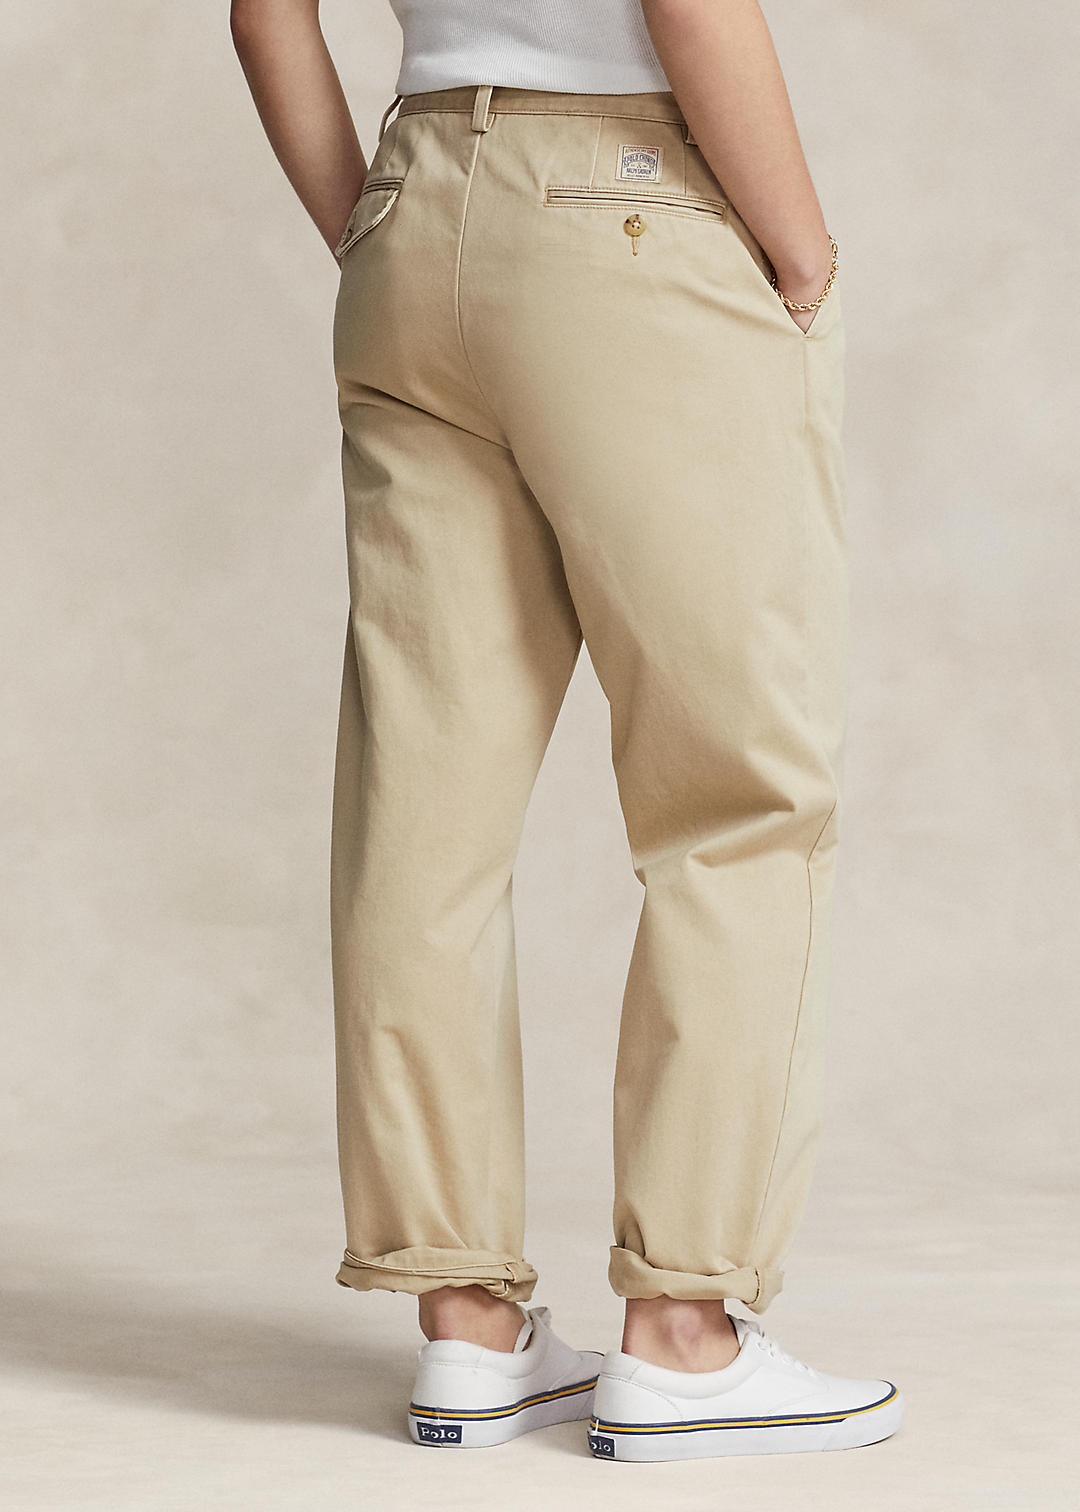 Polo Ralph Lauren Whitman Relaxed Fit Pleated Chino Trouser 6